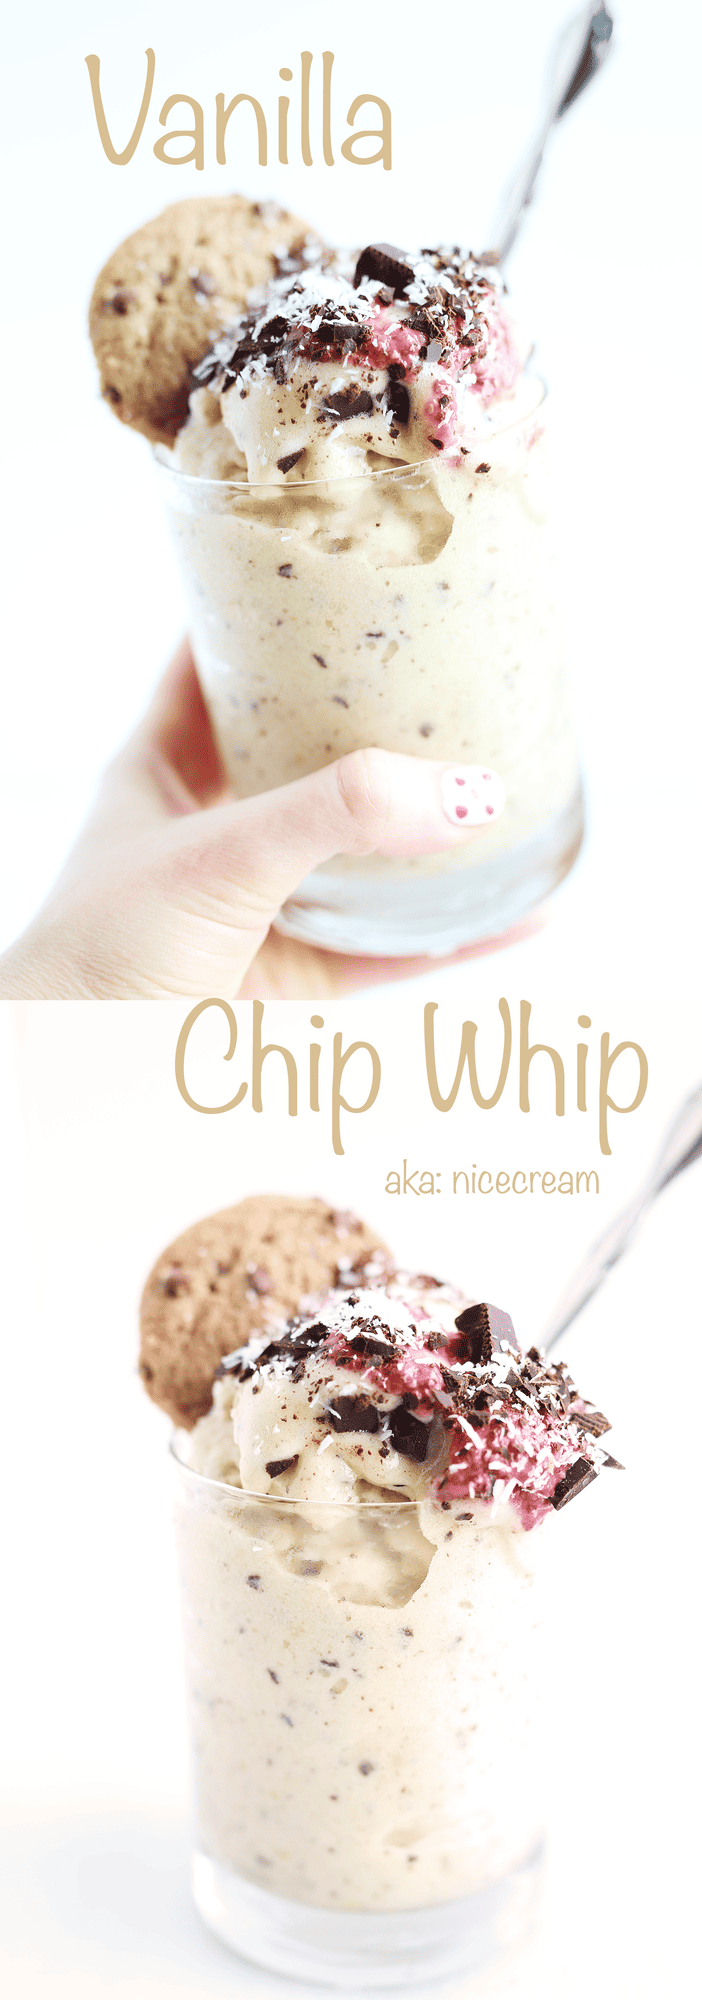 Vanilla Chip Whip also knows as “nice cream” is a healthy and easy ice cream alternative that I’m sure you are going to love! Super simple!